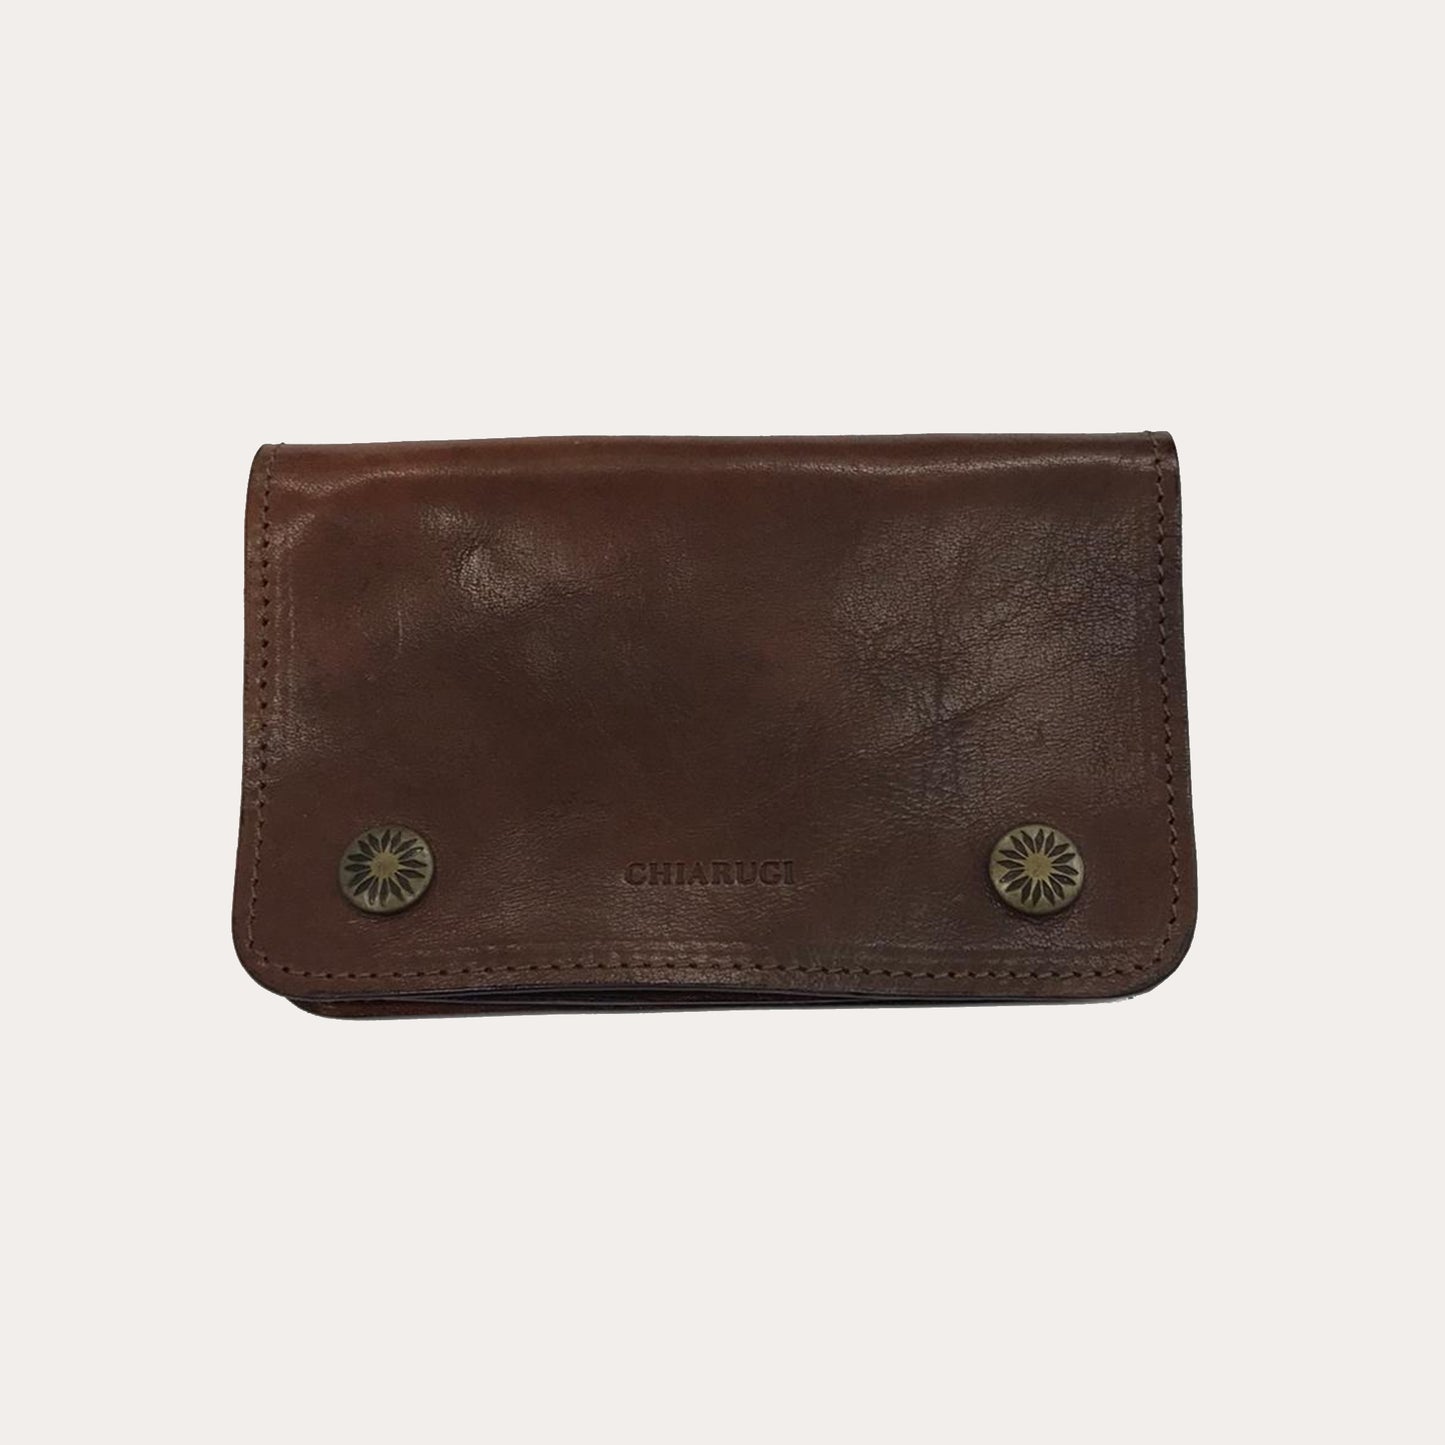 Chiarugi Brown Leather Flap Over Purse